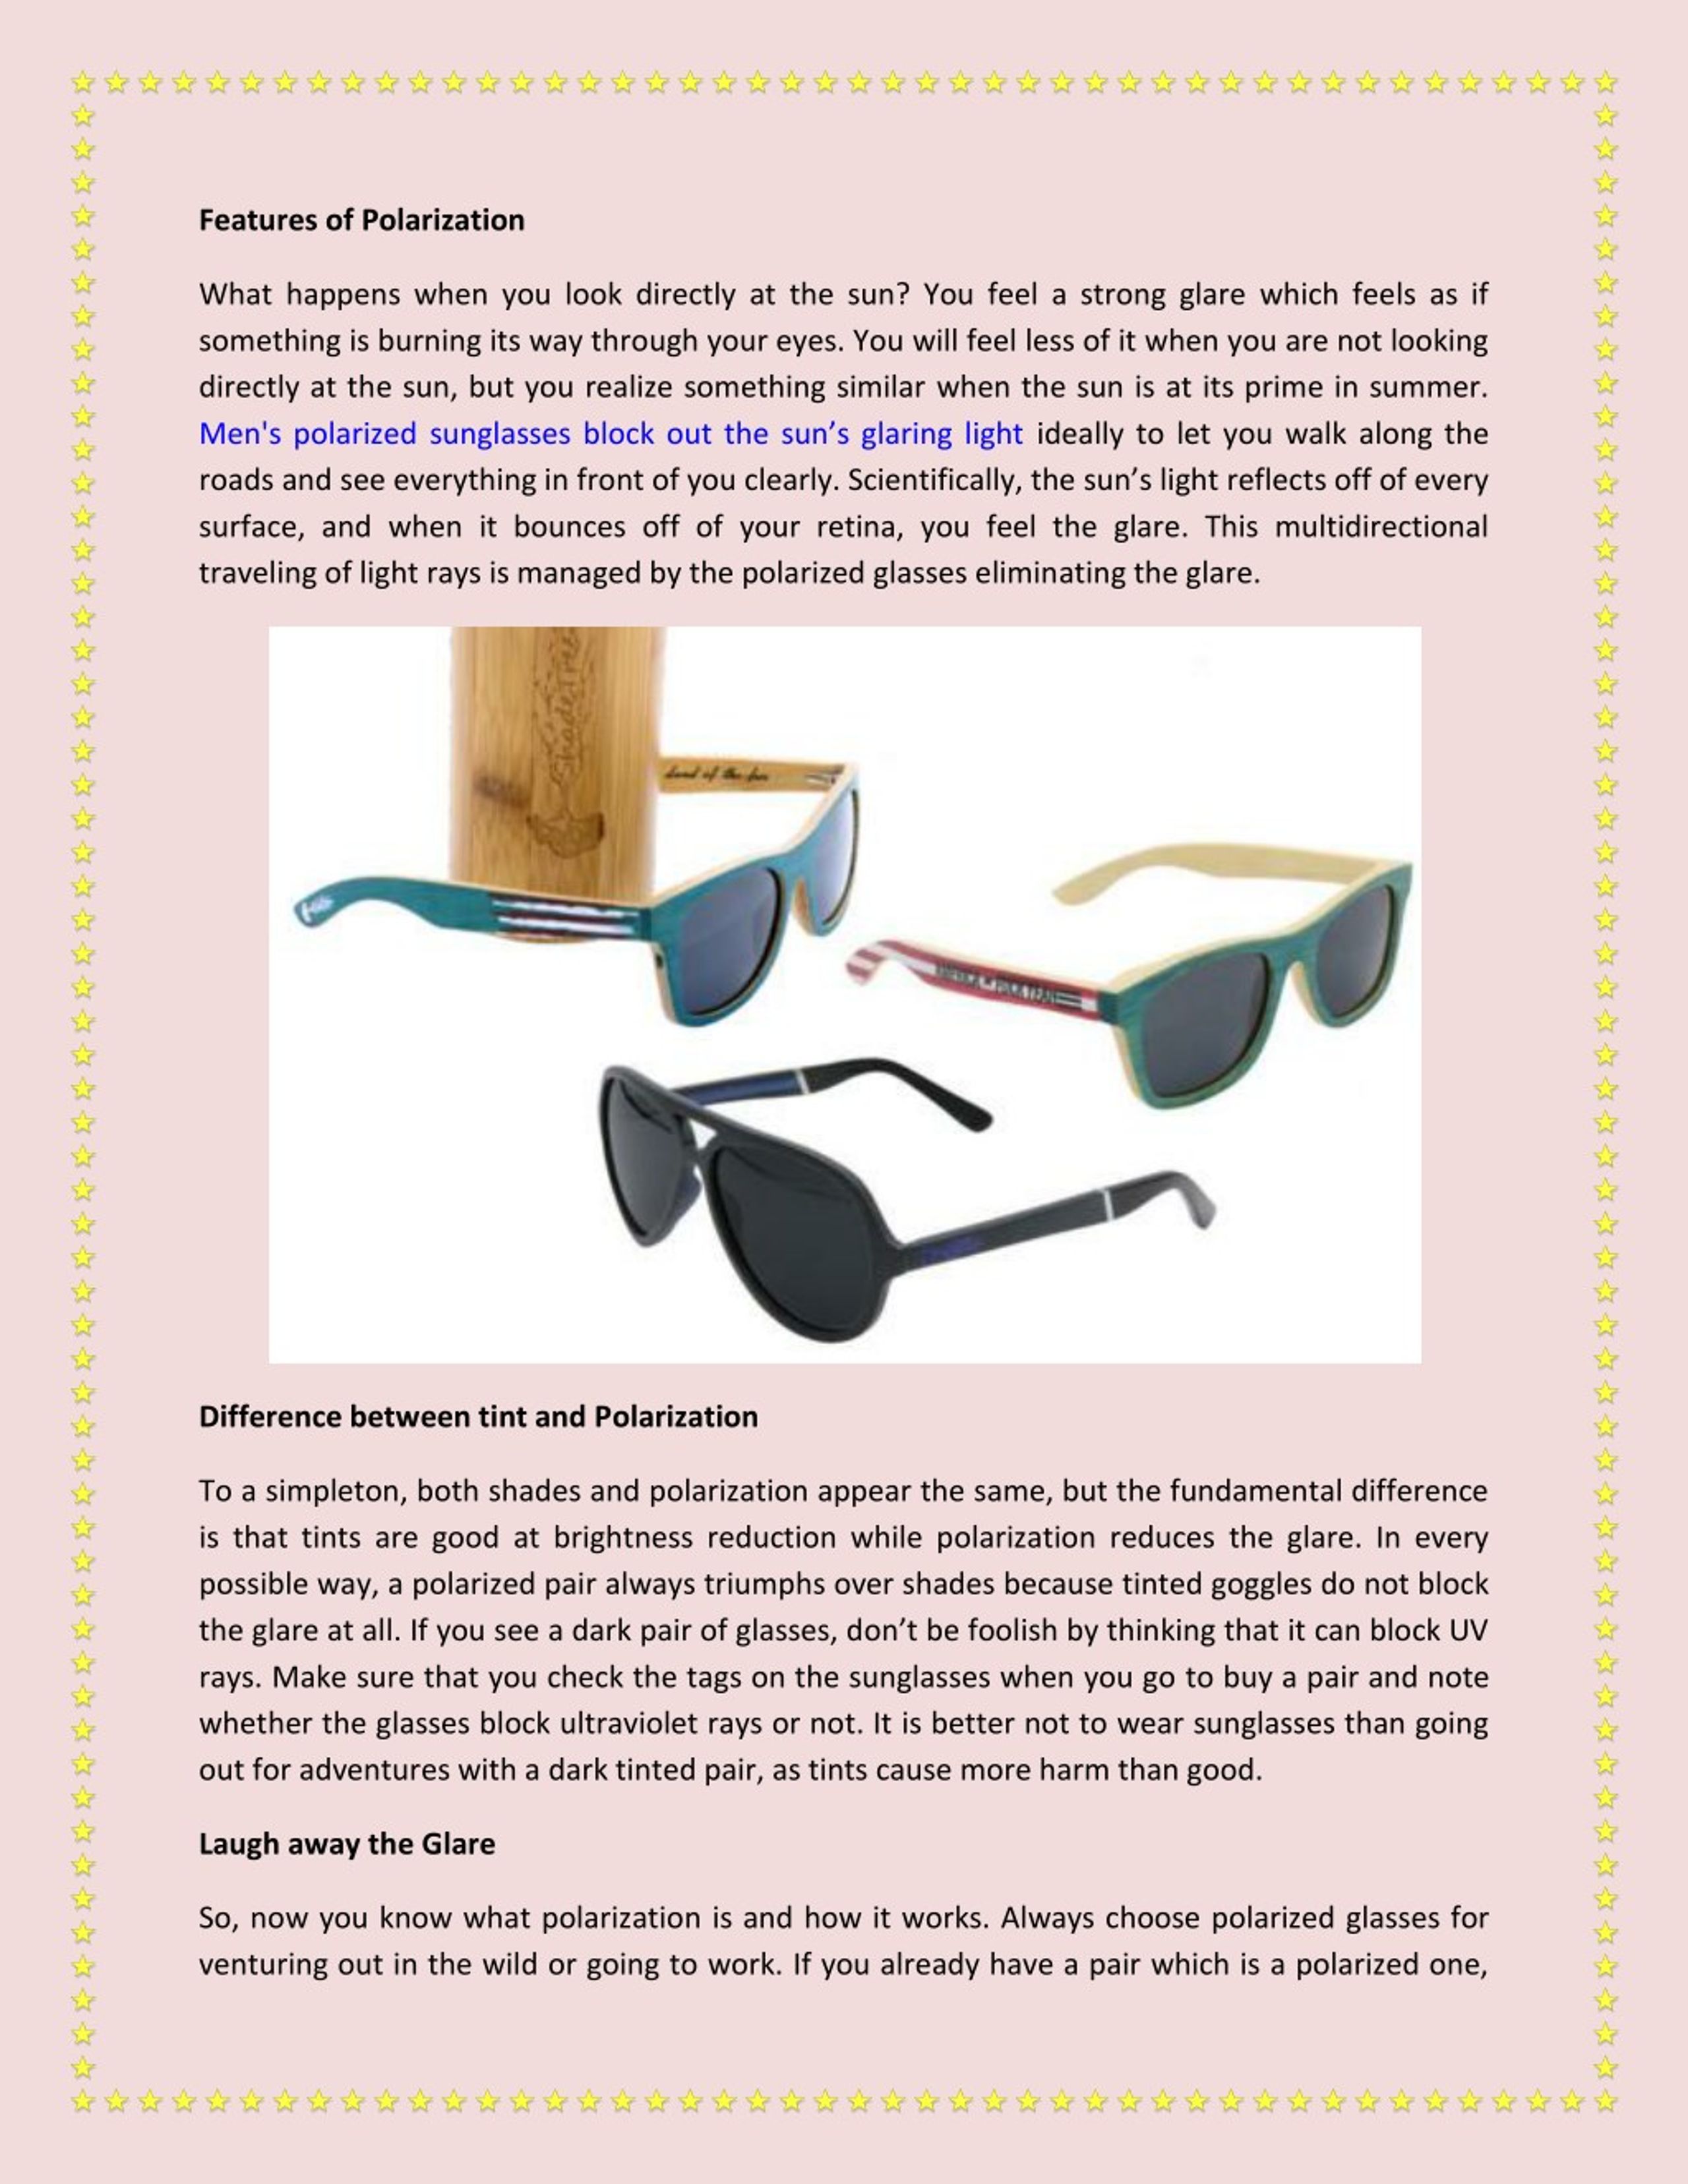 PPT - How Do Polarized Sunglasses Work For You ? PowerPoint ...